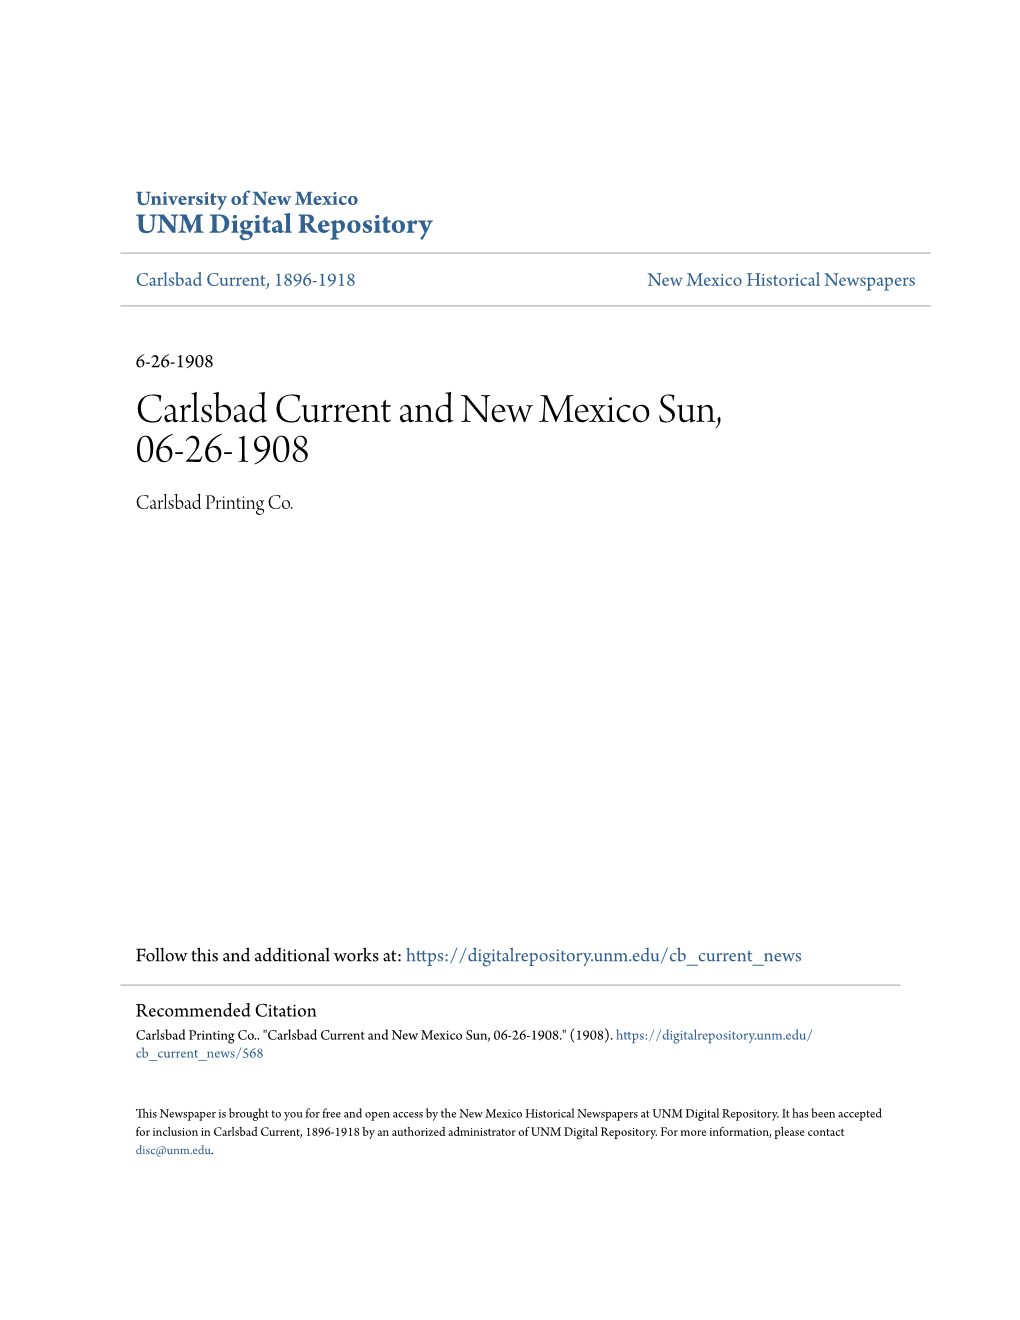 Carlsbad Current and New Mexico Sun, 06-26-1908 Carlsbad Printing Co